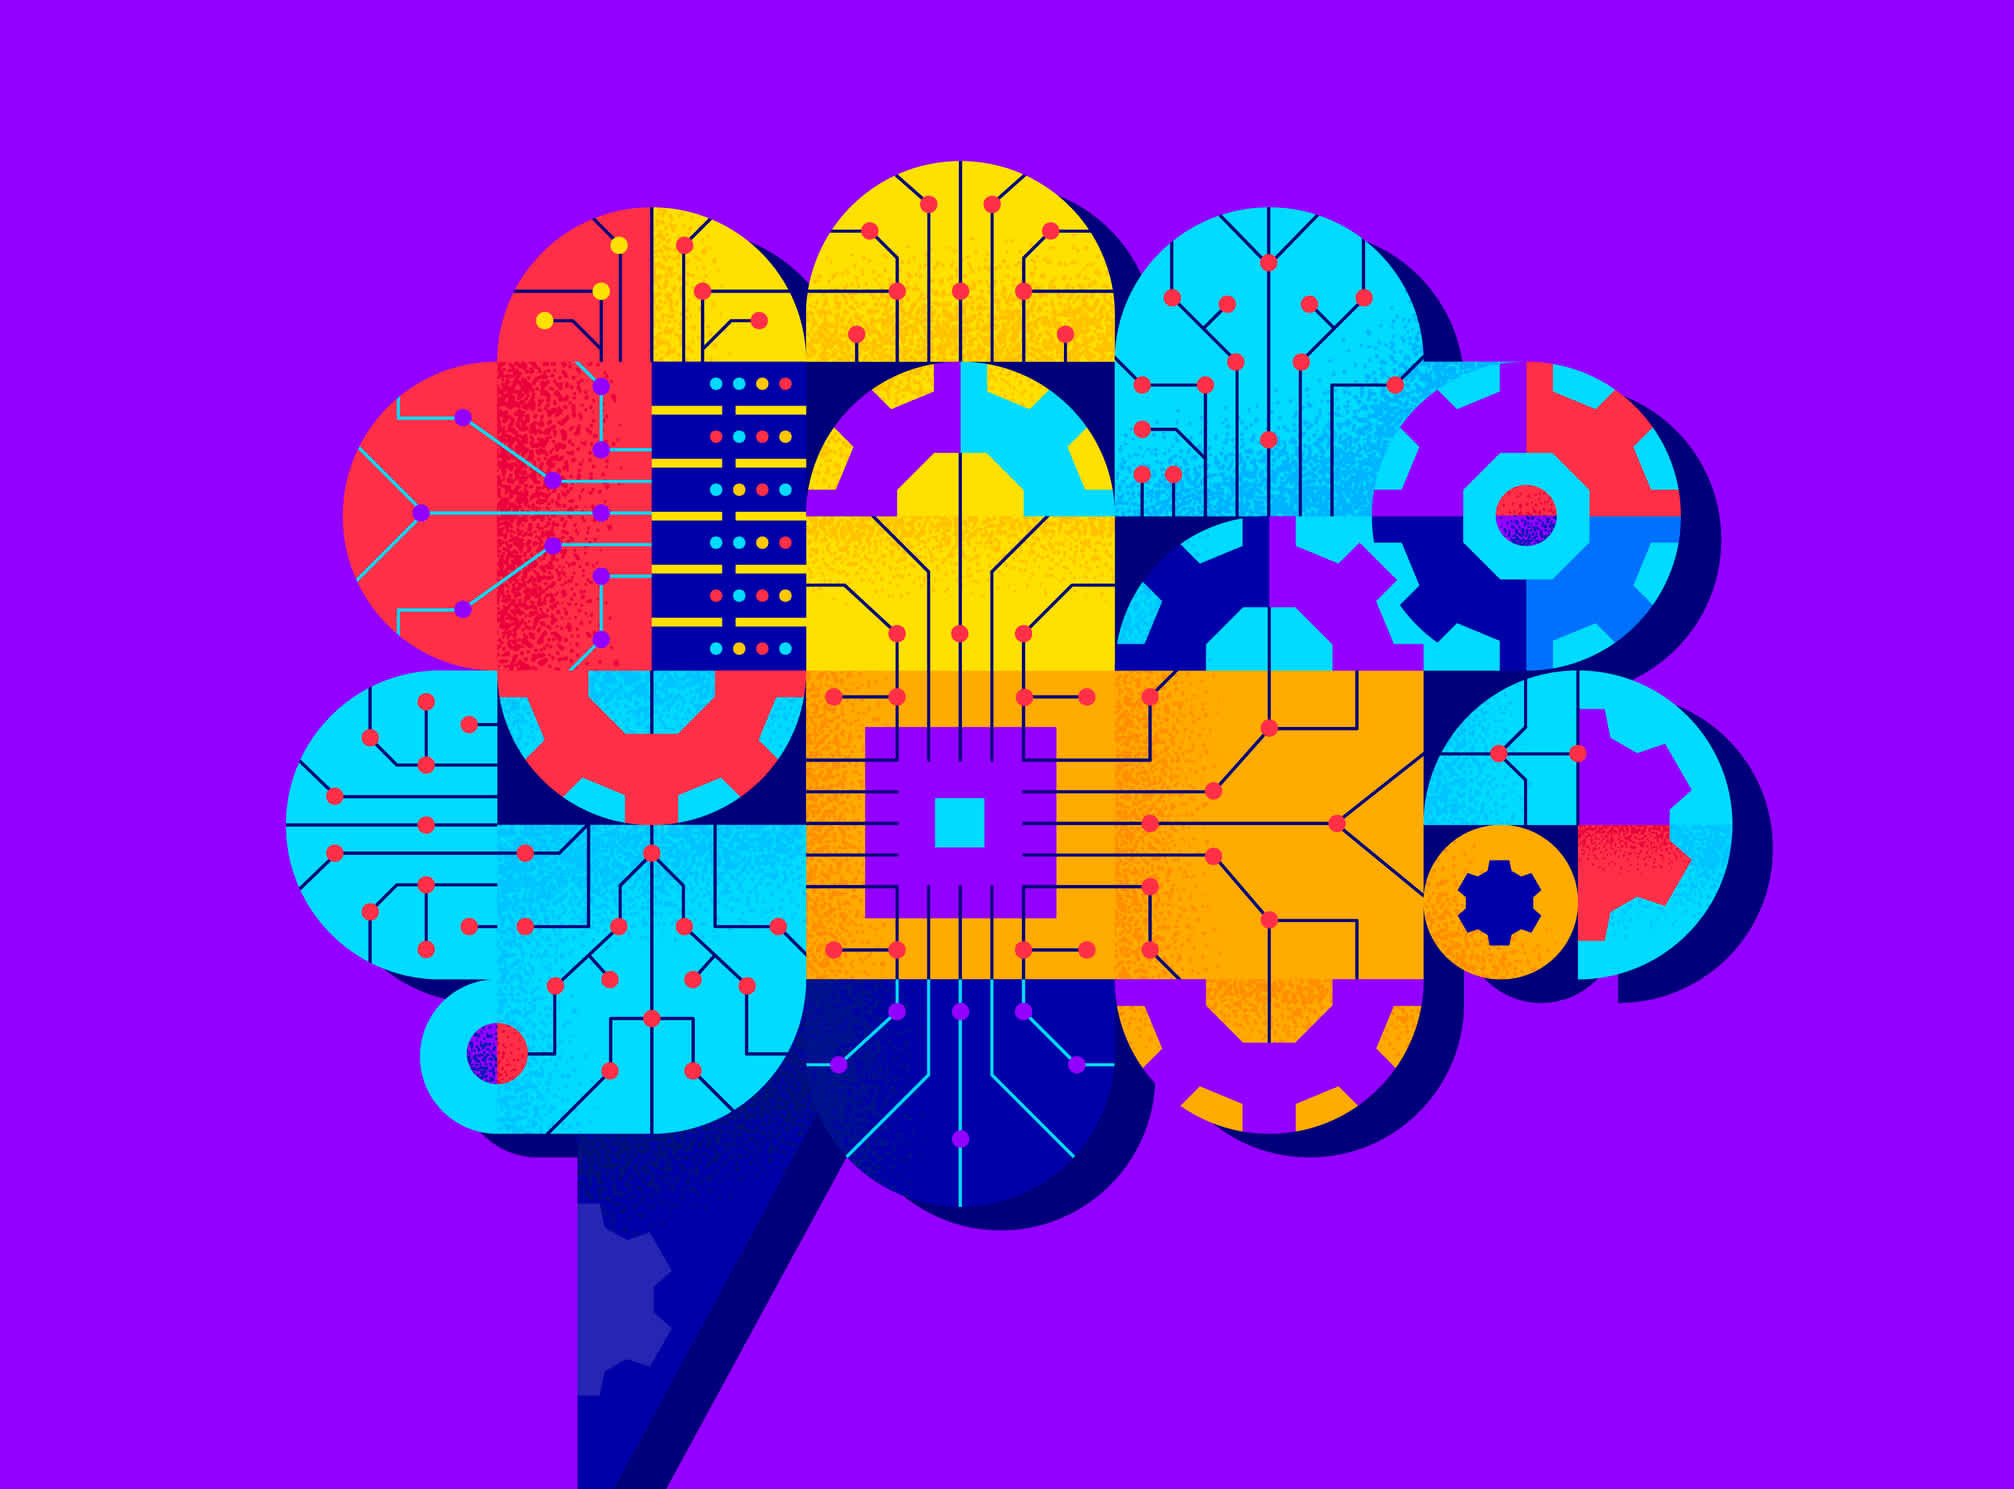 Illustration of a brain representing predictive analytics and learning